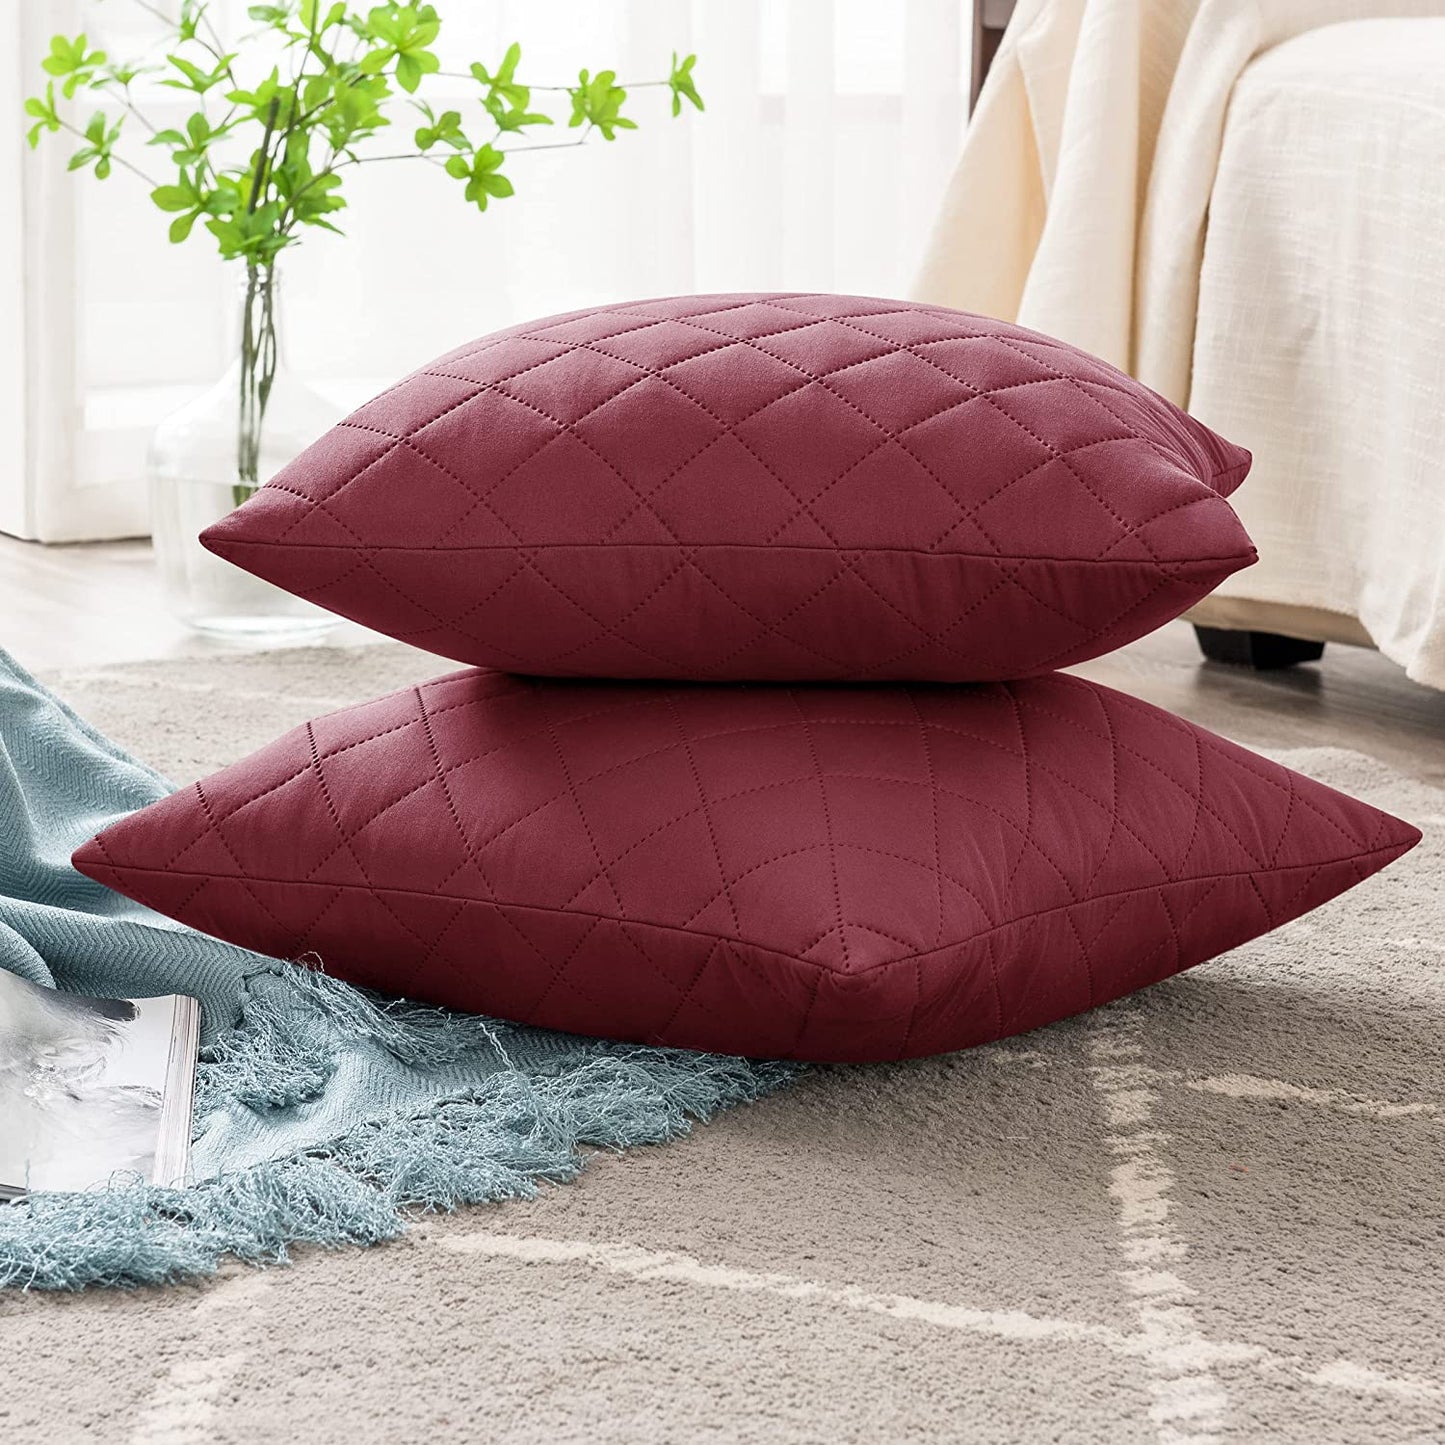 QUILTED CUSHION COVER SQUARE PATTERN 16 X 16 INCHES - MAROON